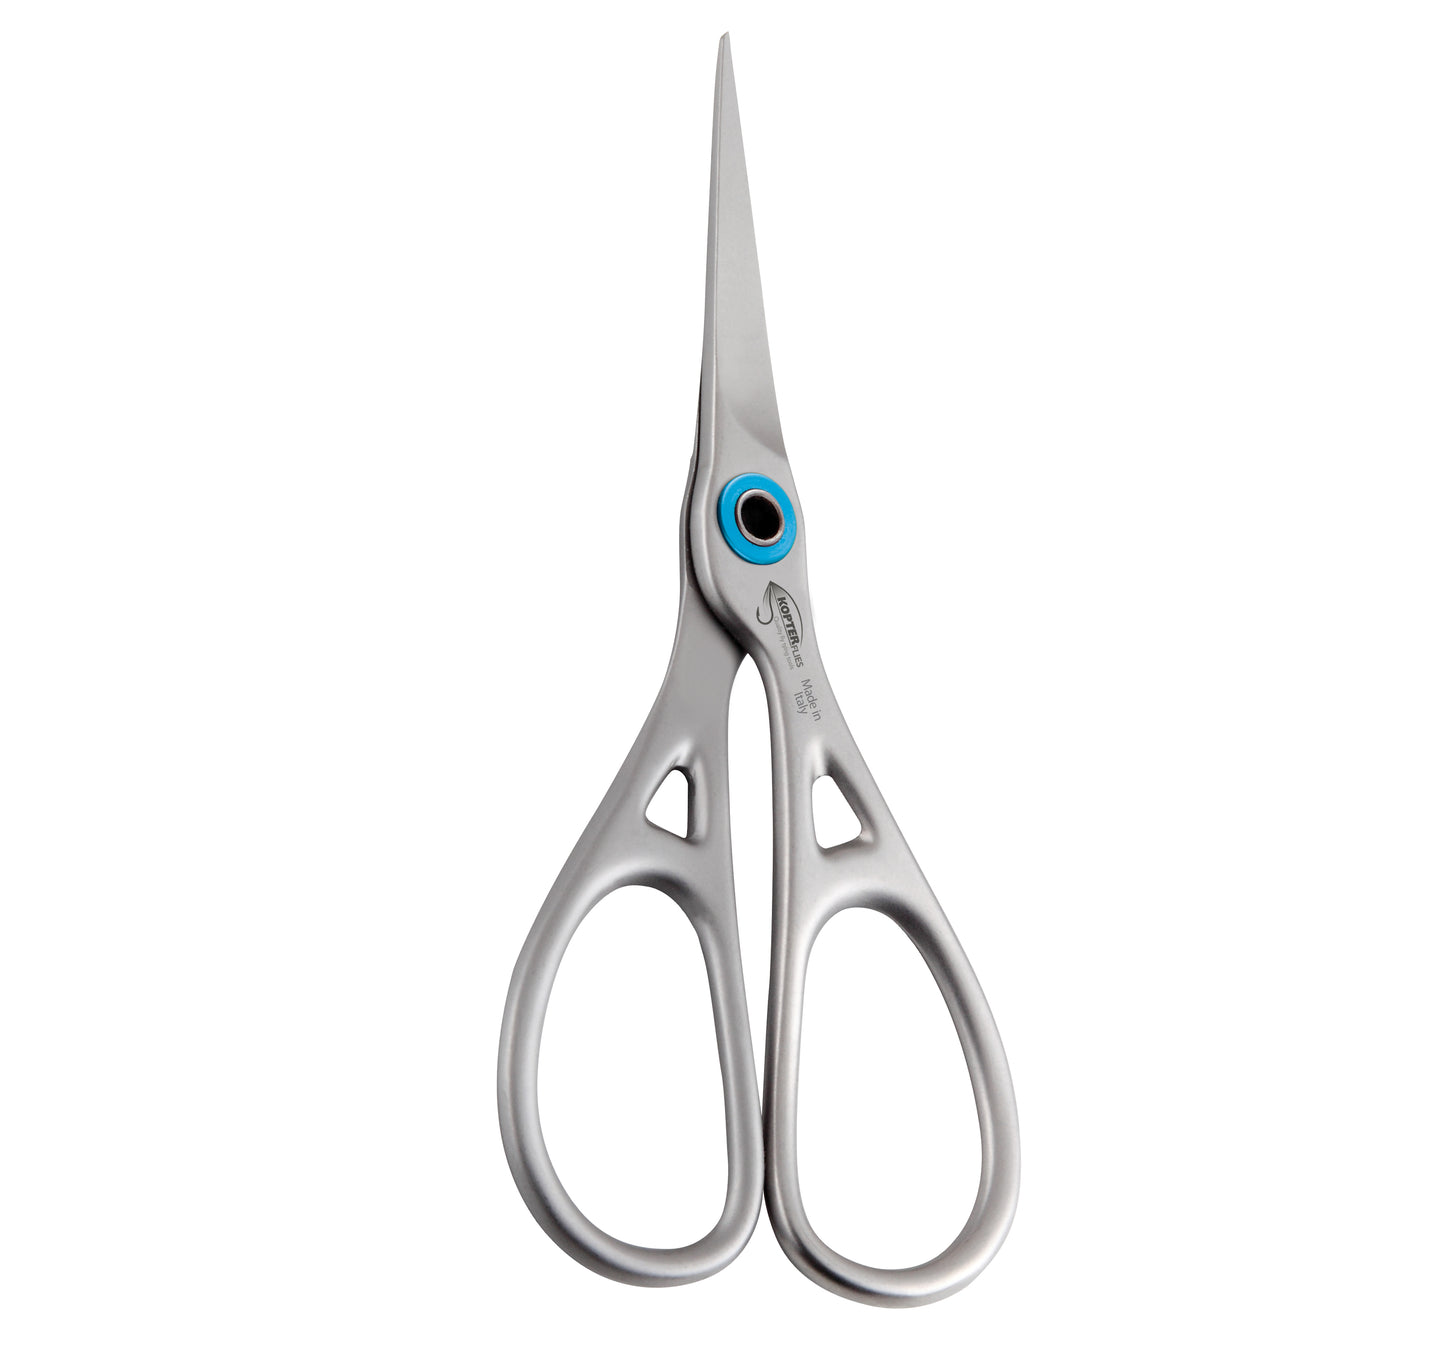 Best Fly Tying Scissors (Tie Faster with Precision) - Guide Recommended